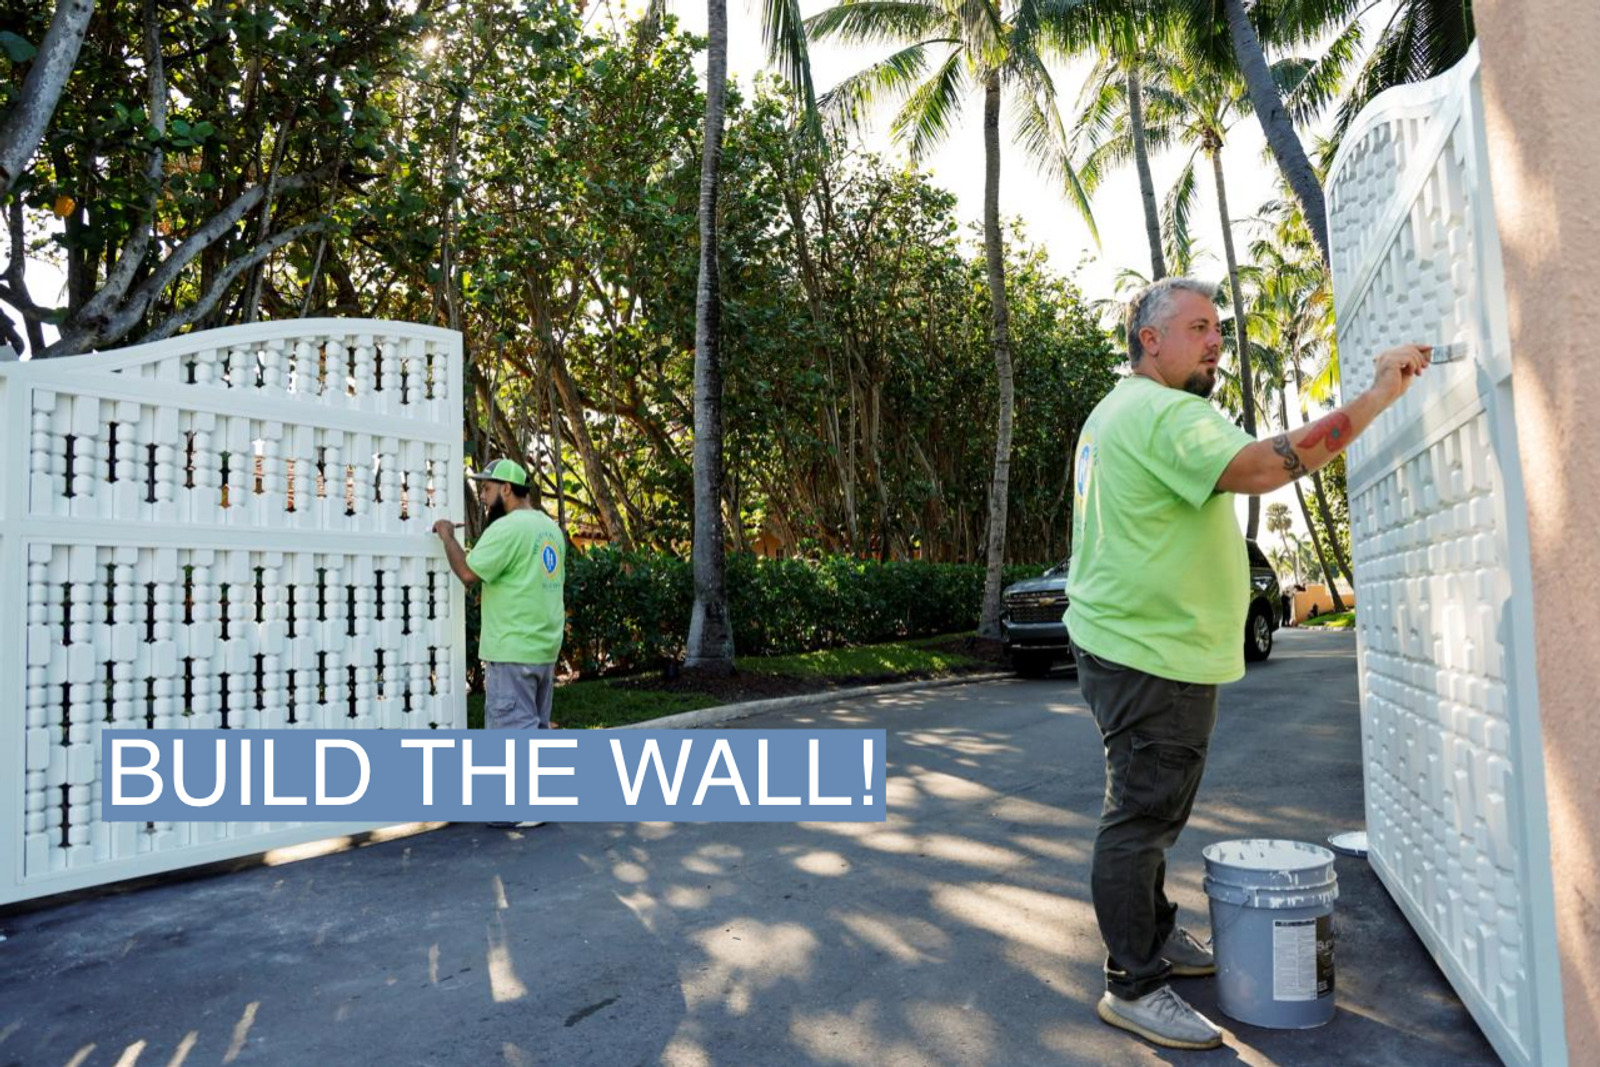 Workers paint the gates at Mar-a-Lago